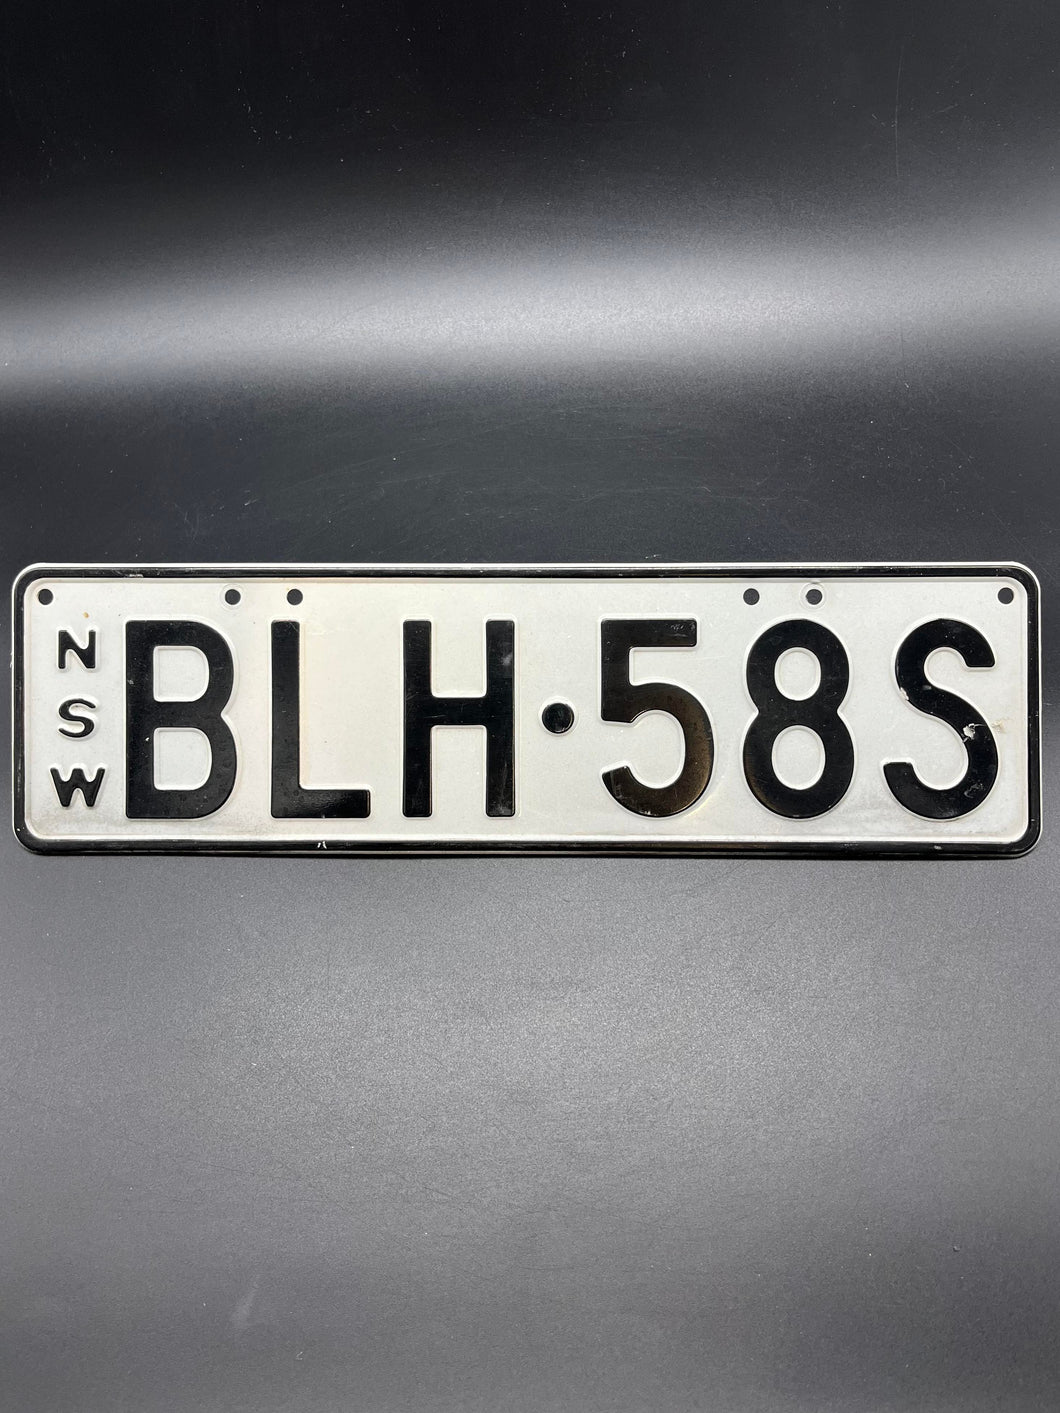 NSW Number Plate - BLH 585